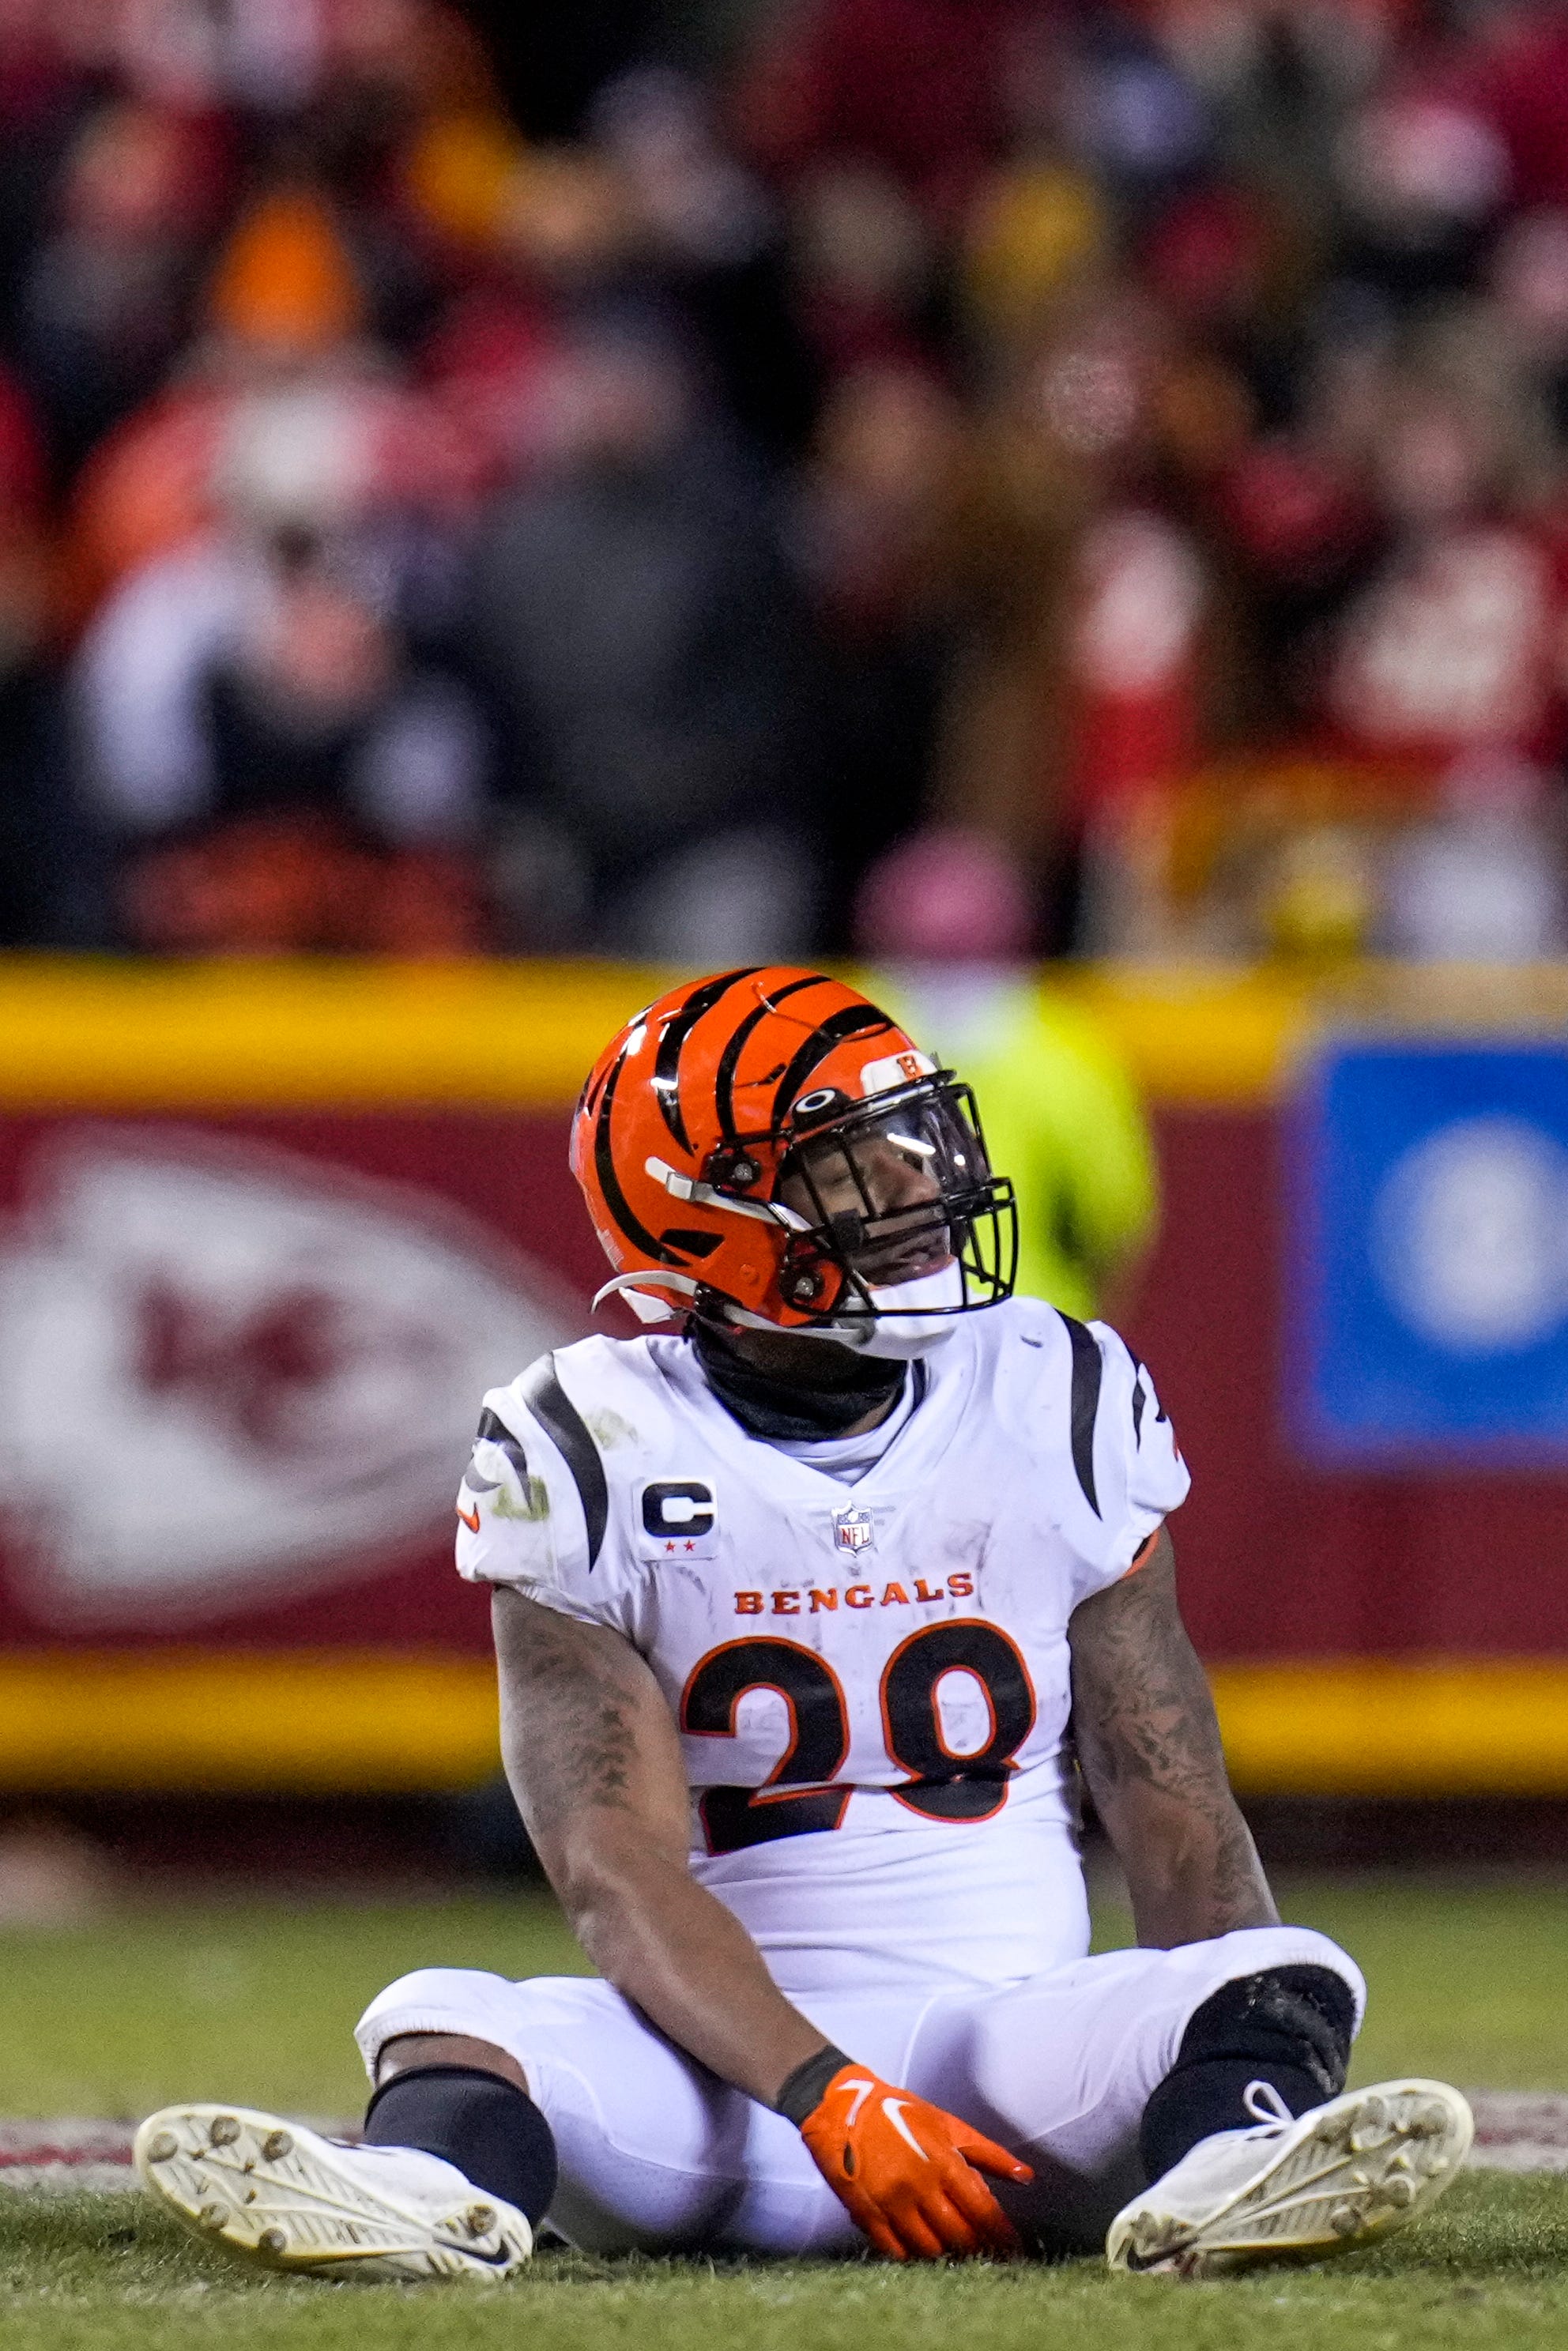 'You should be popped in the face': Cincinnati Bengals RB Joe Mixon wanted for aggravated menacing